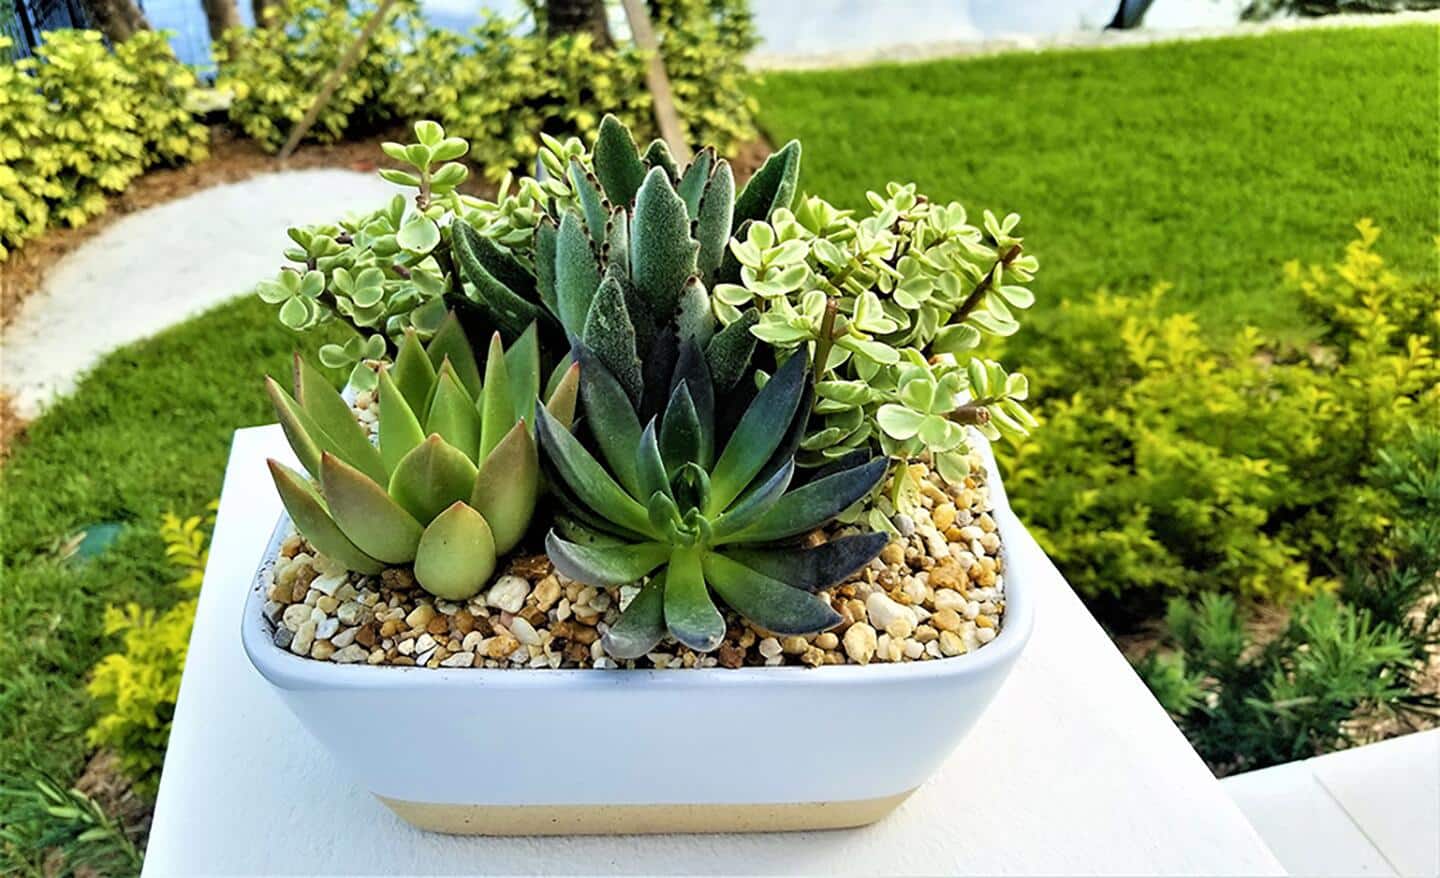 A bowl of succulents outside in a garden